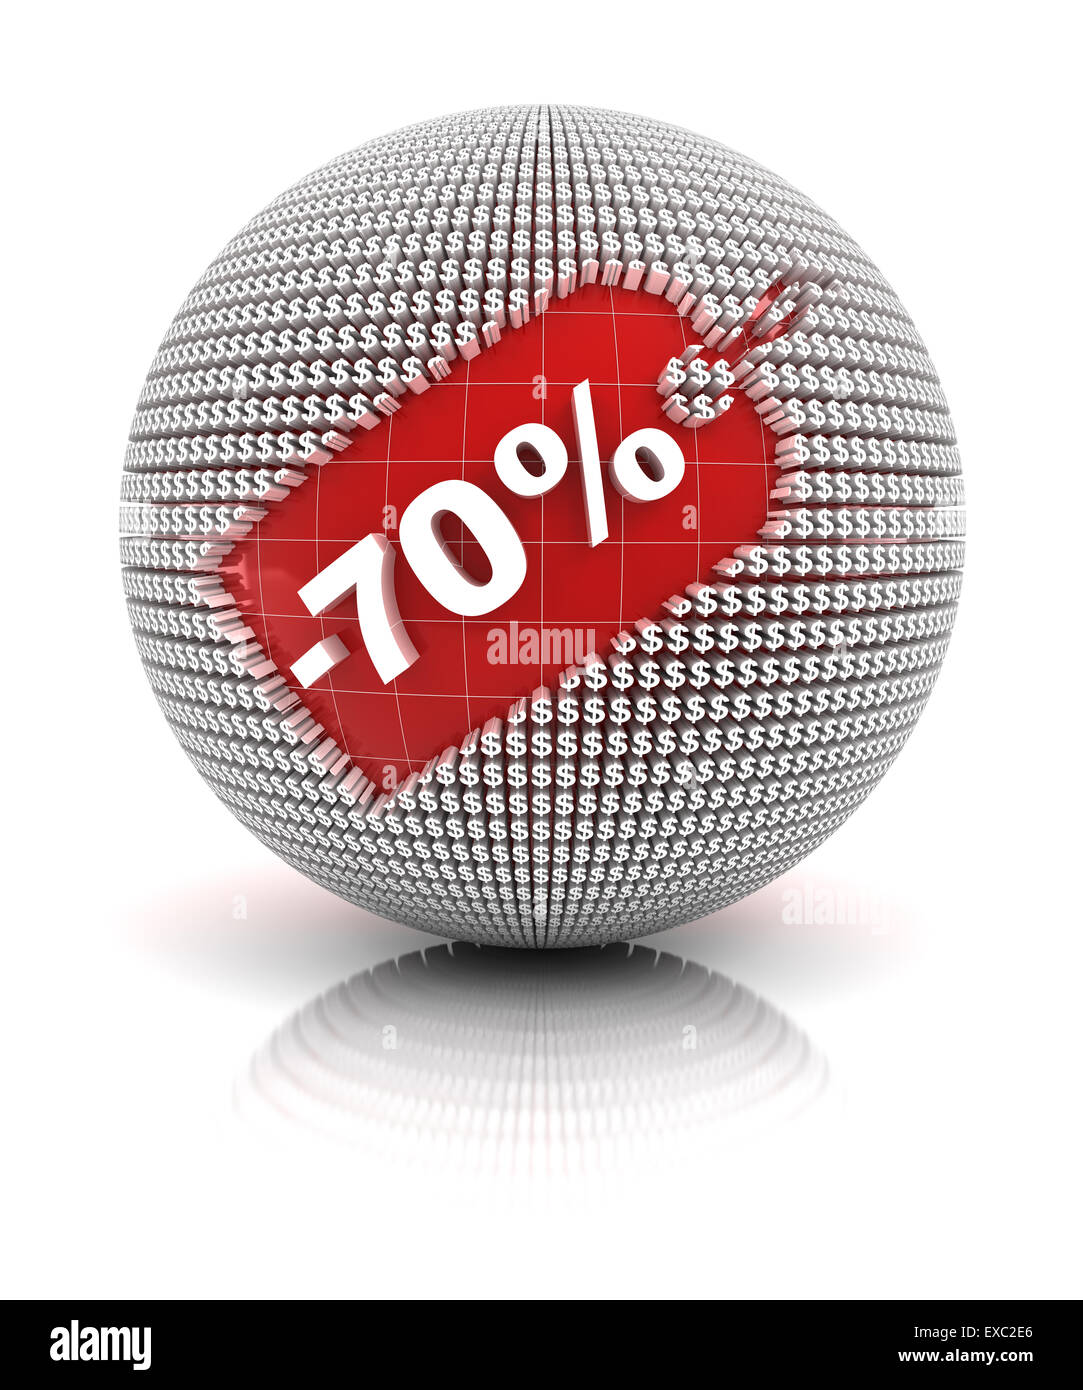 70 percent off sale tag on a sphere Stock Photo